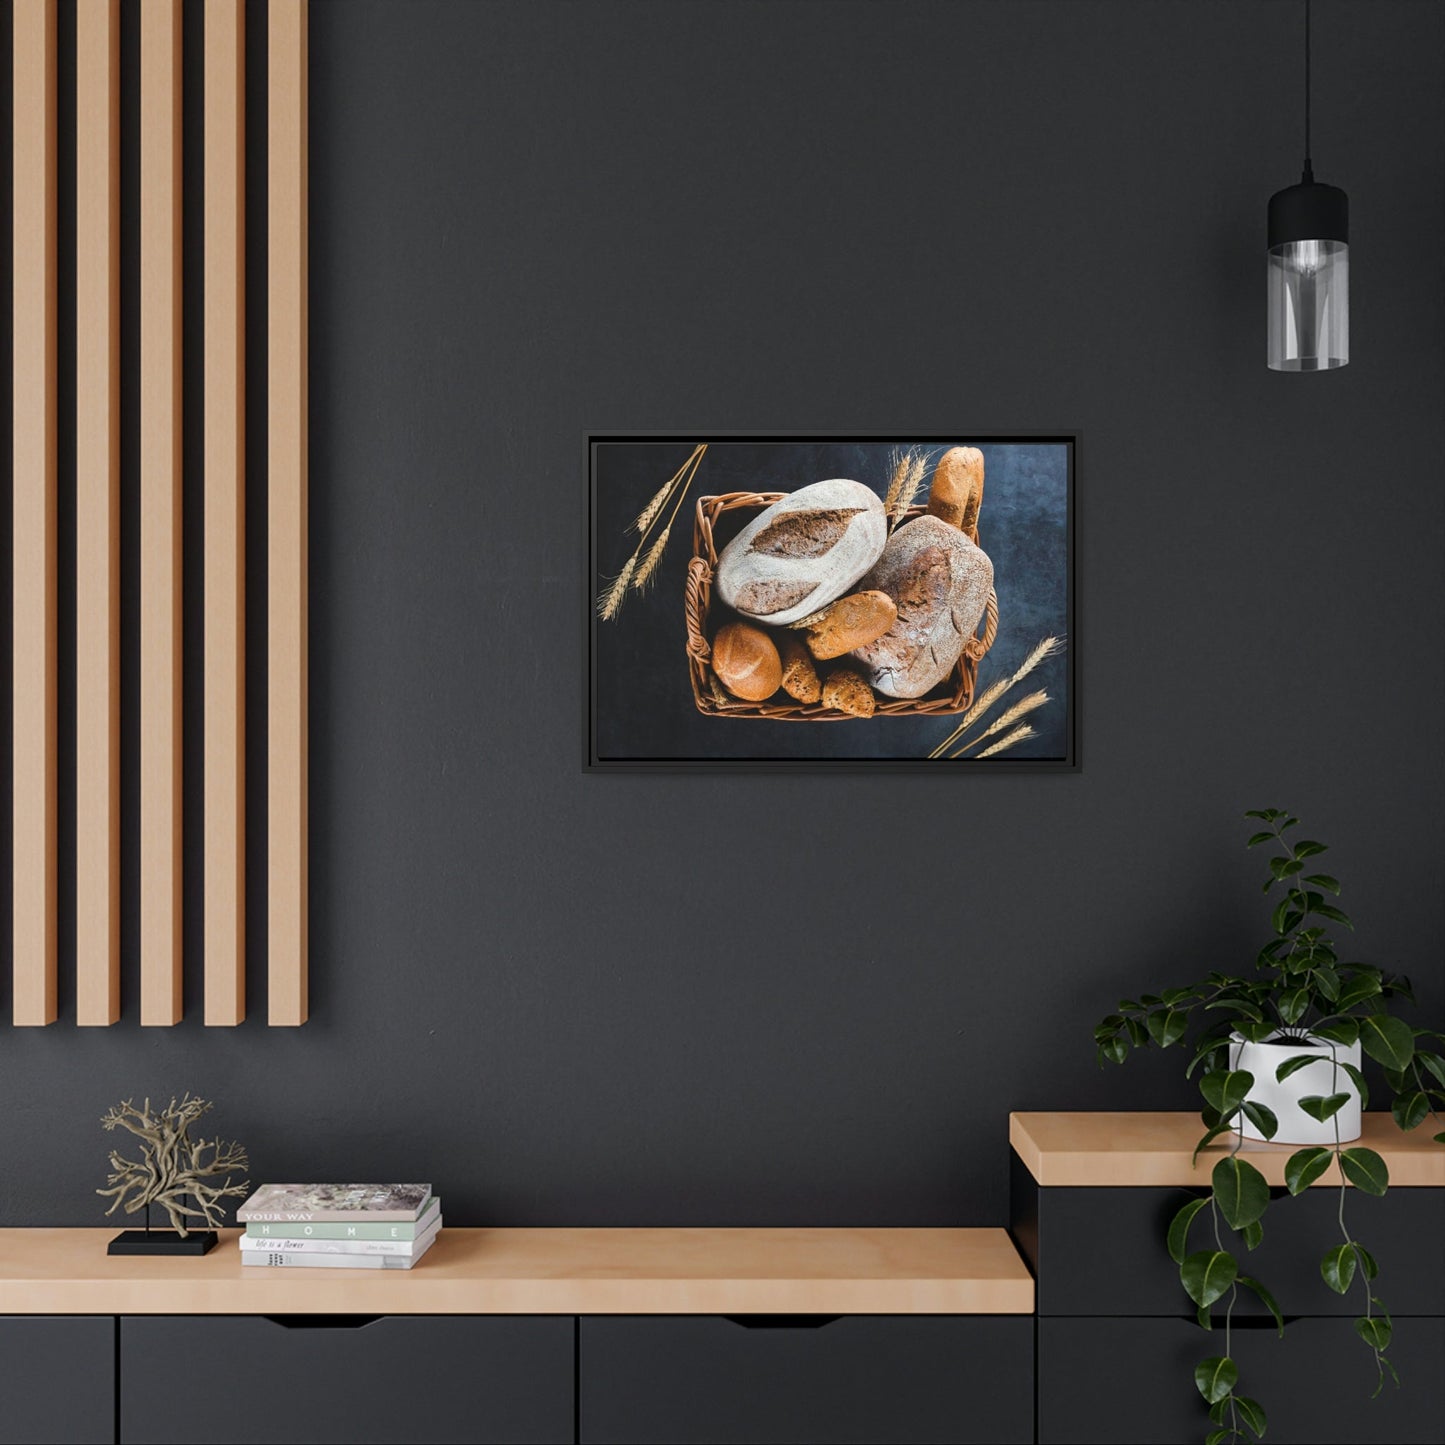 Rustic Bakery Delight: Natural Canvas and Poster with Freshly Baked Bread Art